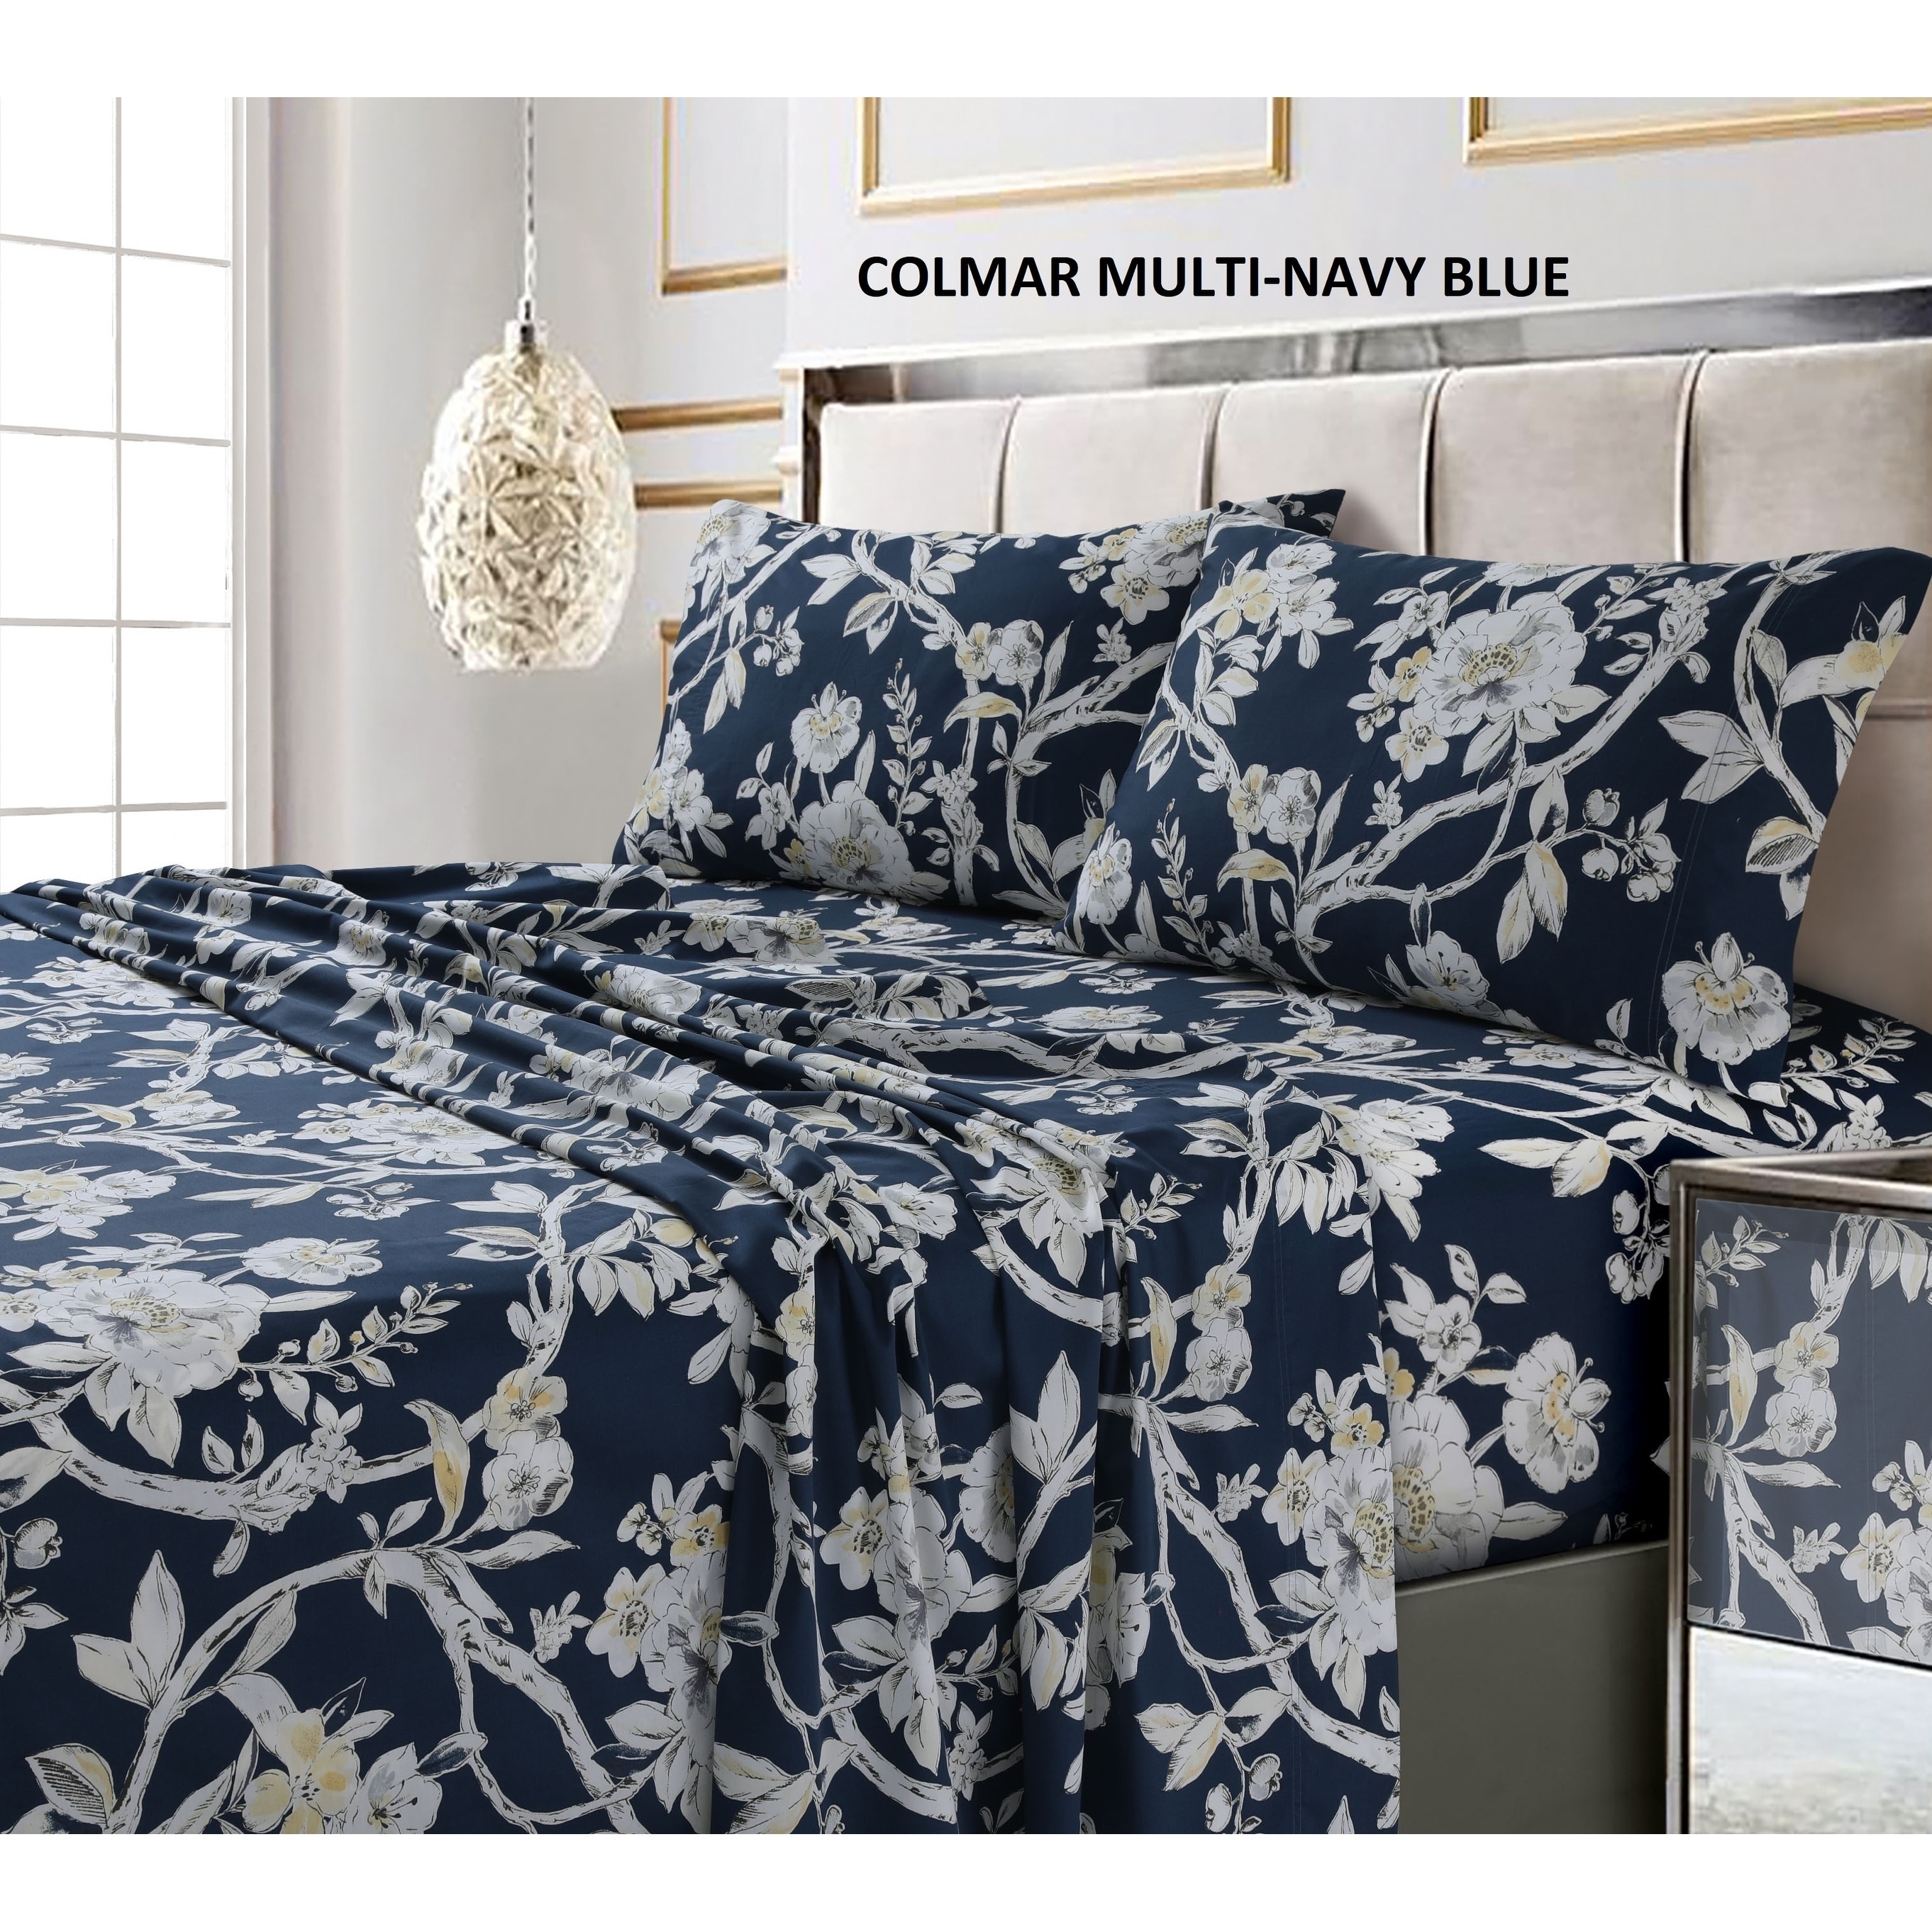 Details about   Twin/Full/Queen/King Bed Sheet Set 350 TC Cotton Long Stable 15" Drop Navy Blue